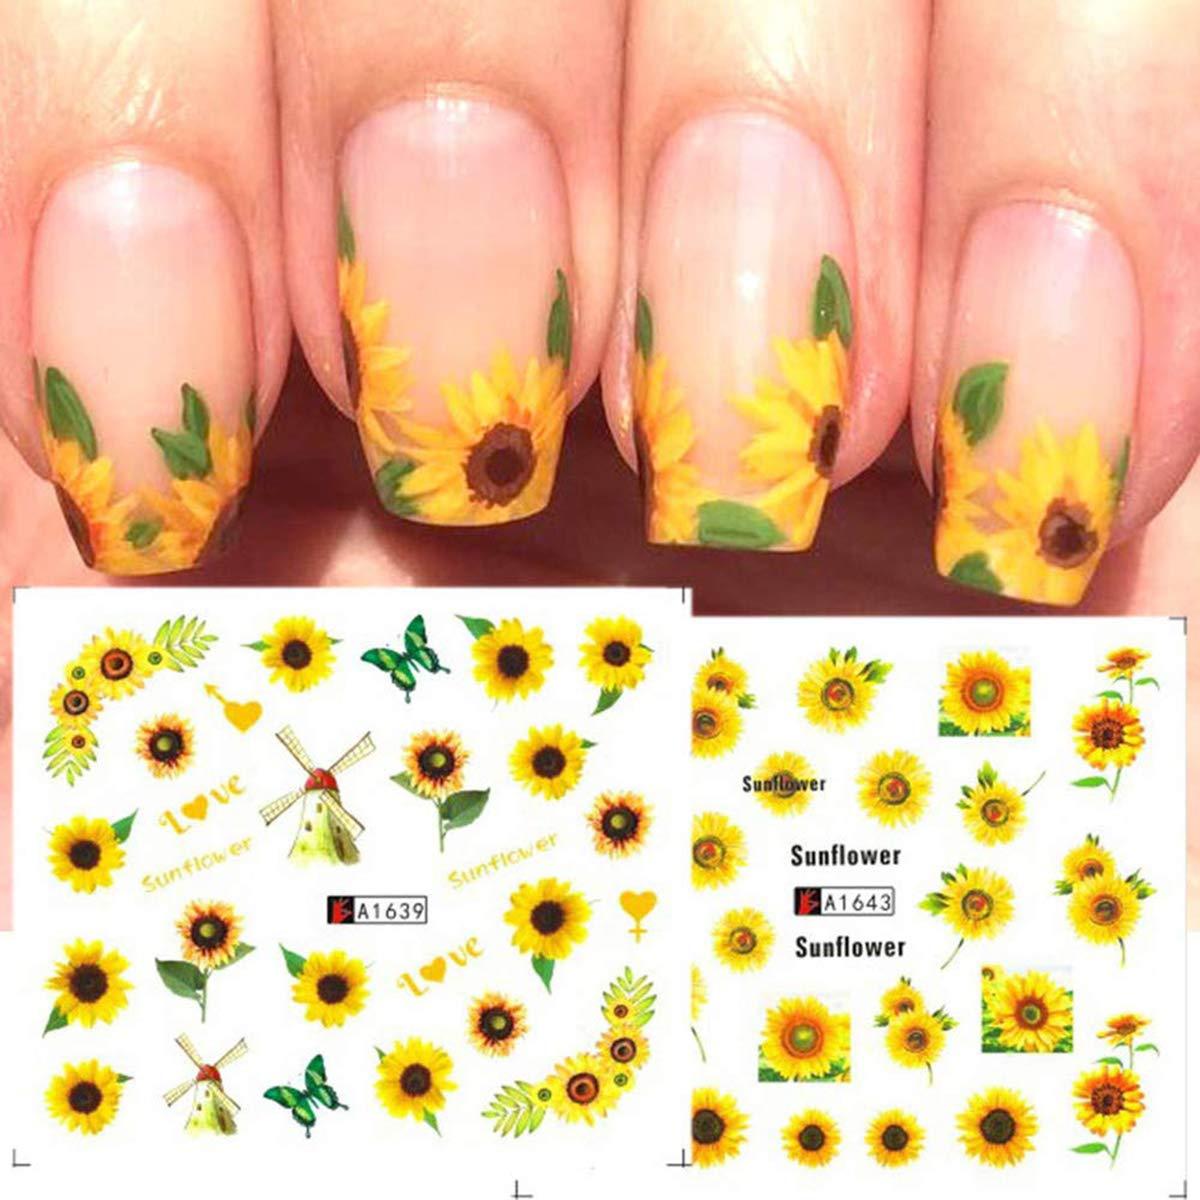  10pcs 20x4cm Fine Rose Daisy Sunflower Birds Flower Nail Foil  Transfer Sticker Xk3108 for Nails Design Nail Art Stickers Decals Supplies  Manicure Tips Sticker Colorful for Nail Decorations : Beauty 